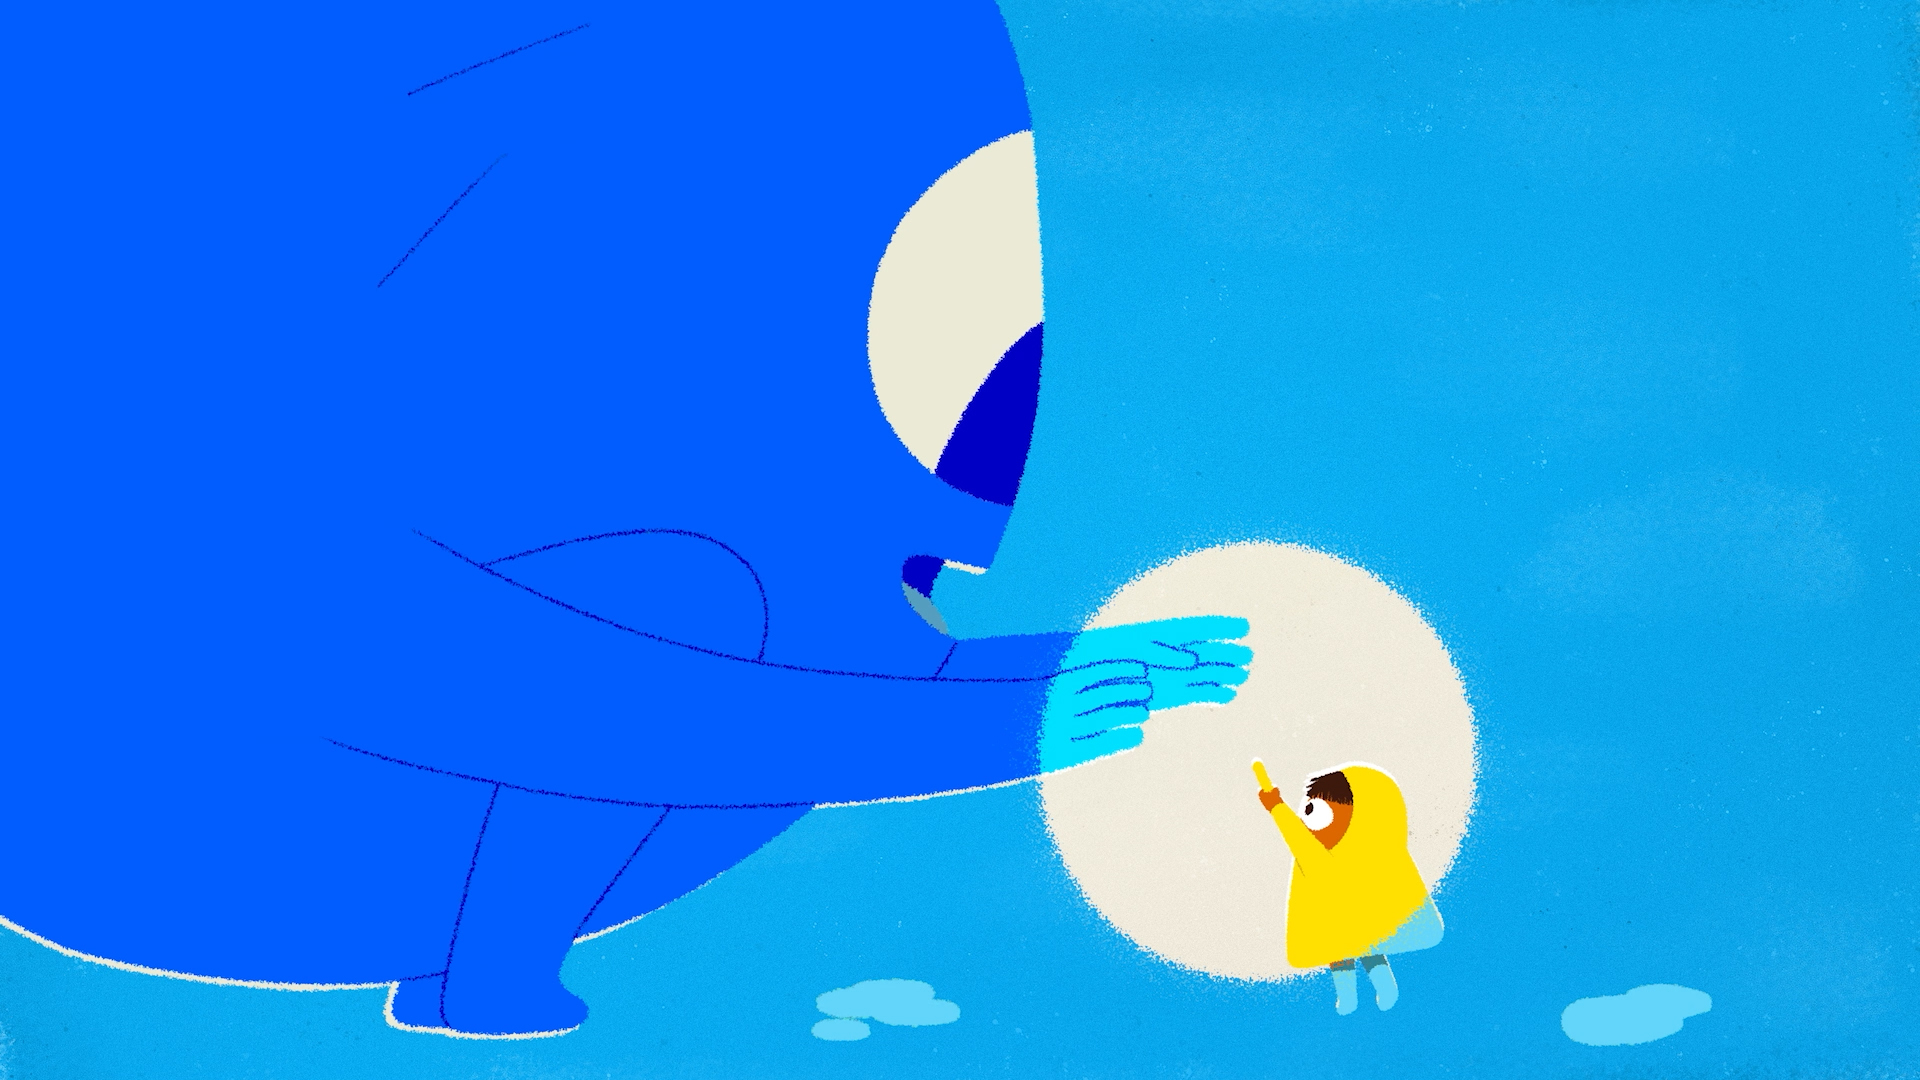 still from animated film with a small child dressed in yellow befriending a large blue creature